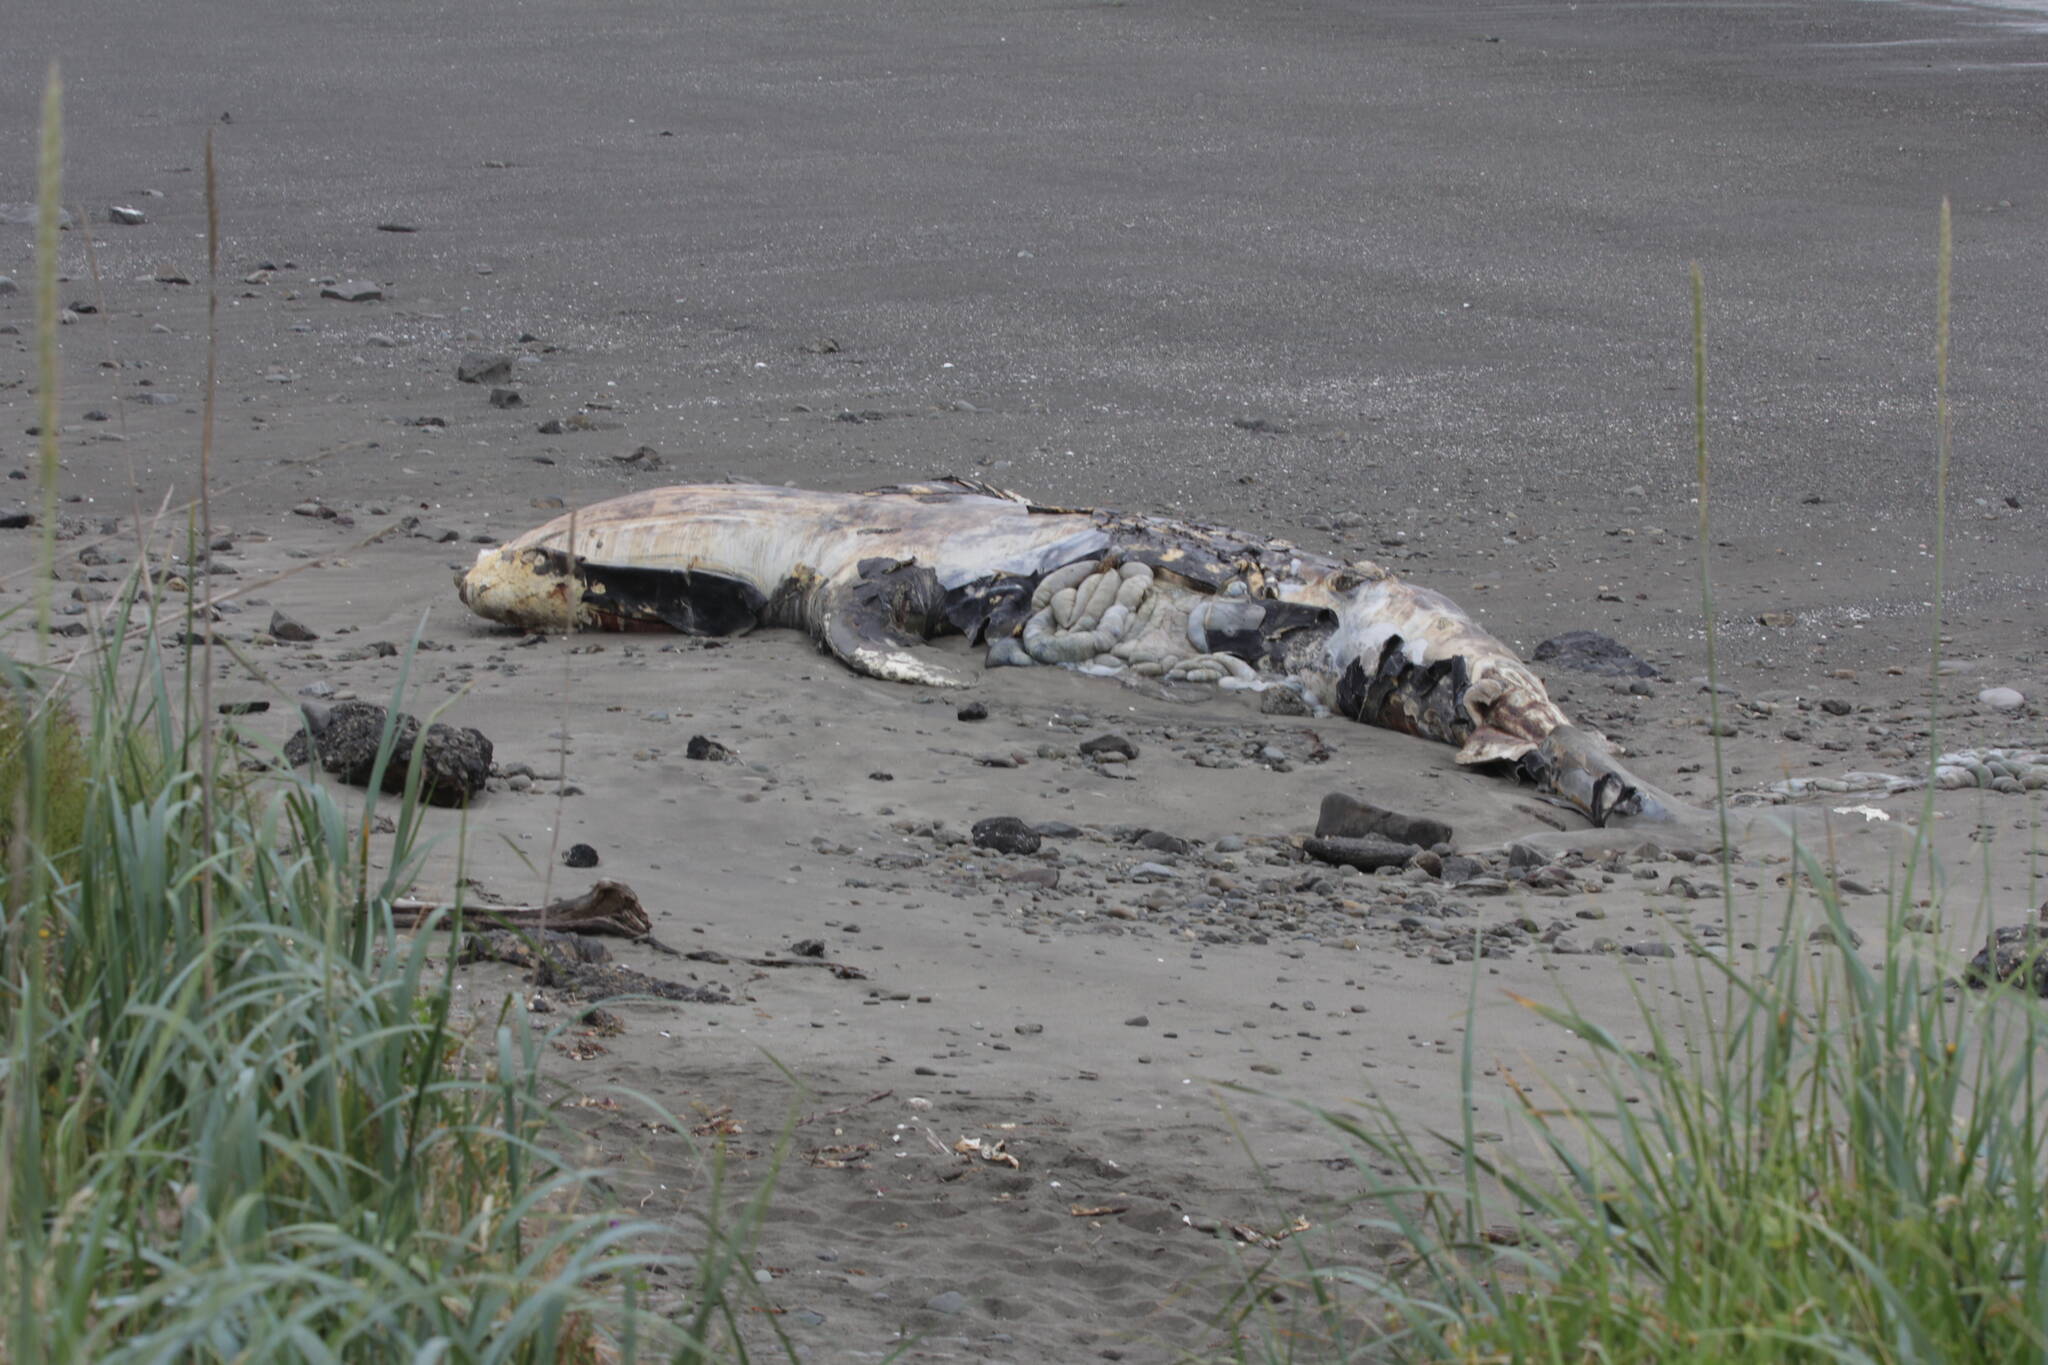 Michael S. Lockett / The Daily World
A dead juvenile gray whale in Westport will be allowed to decompose naturally.